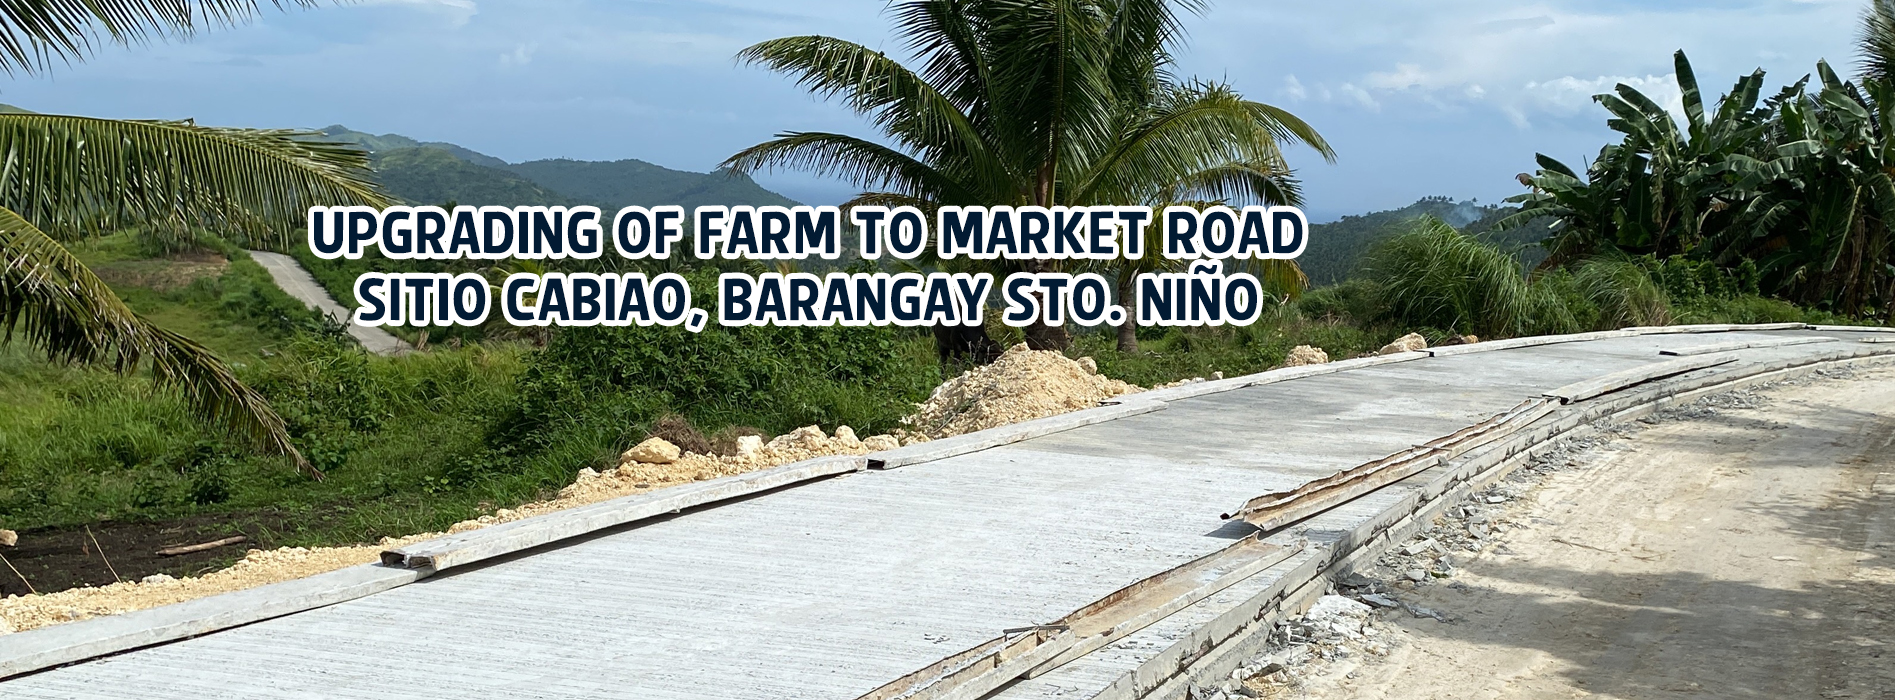 Upgrading of Farm-to-Market Road